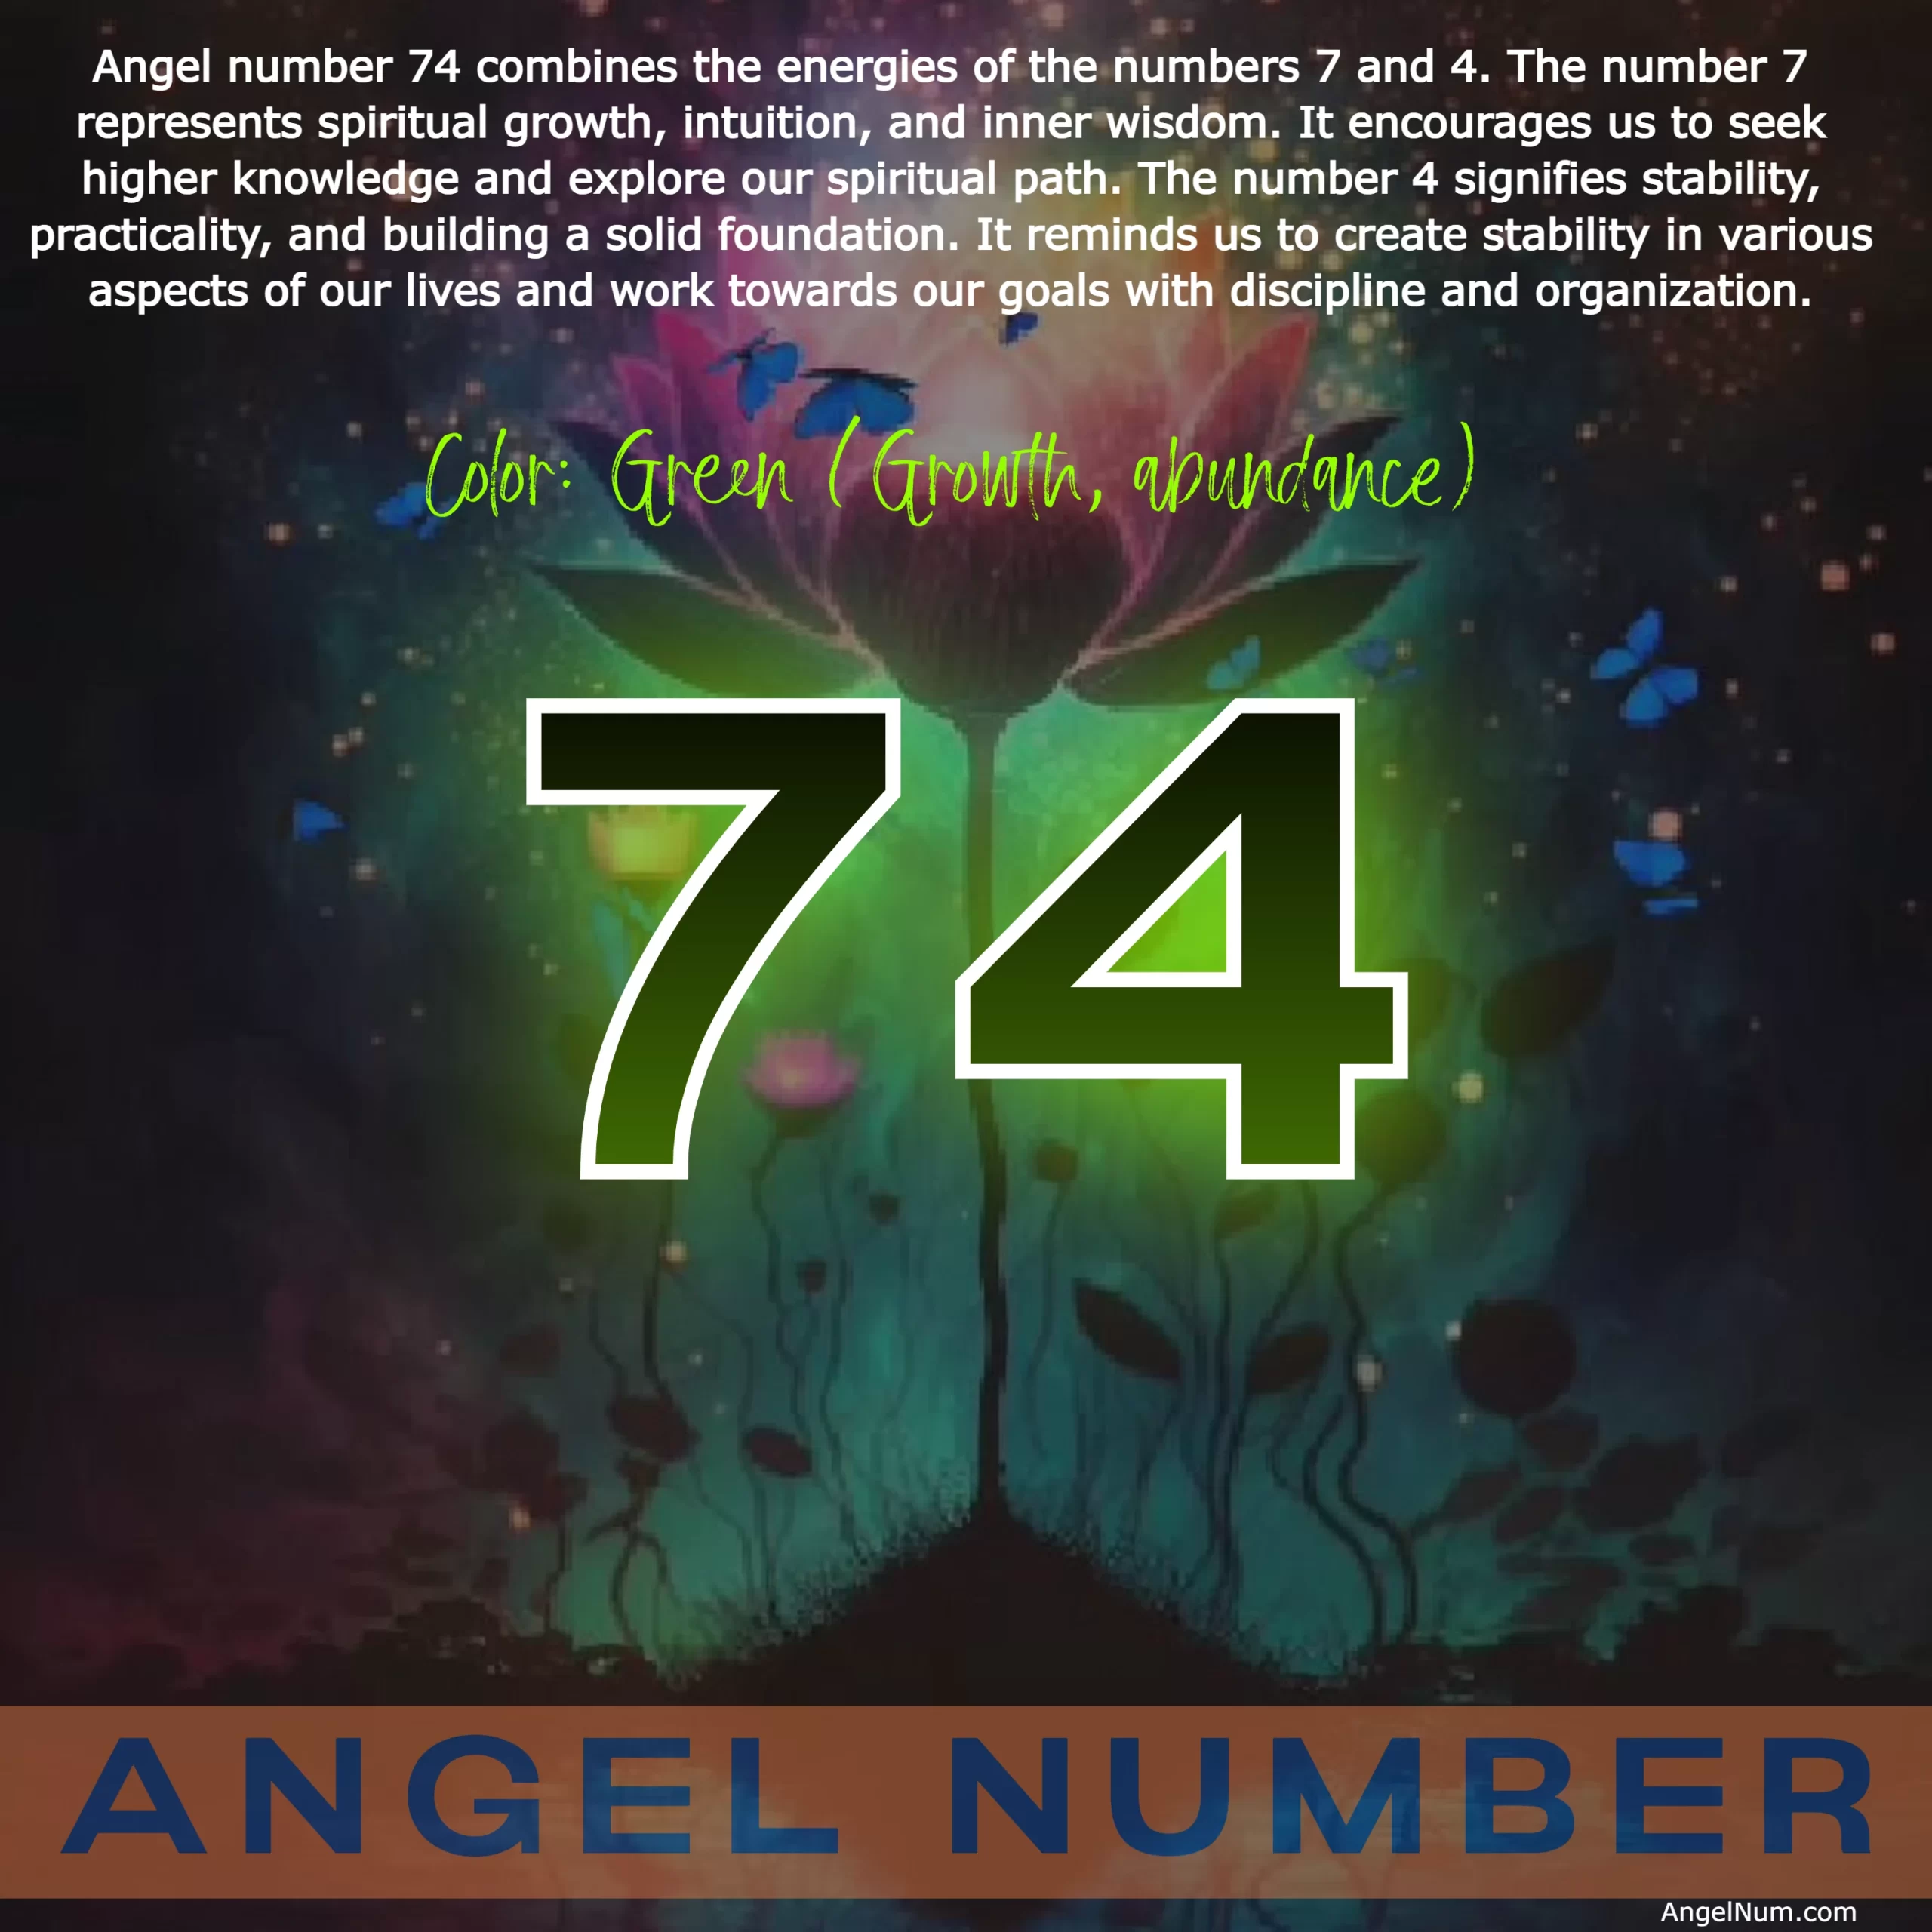 Angel Number 74: Embrace Stability, Practicality, and Spiritual Growth